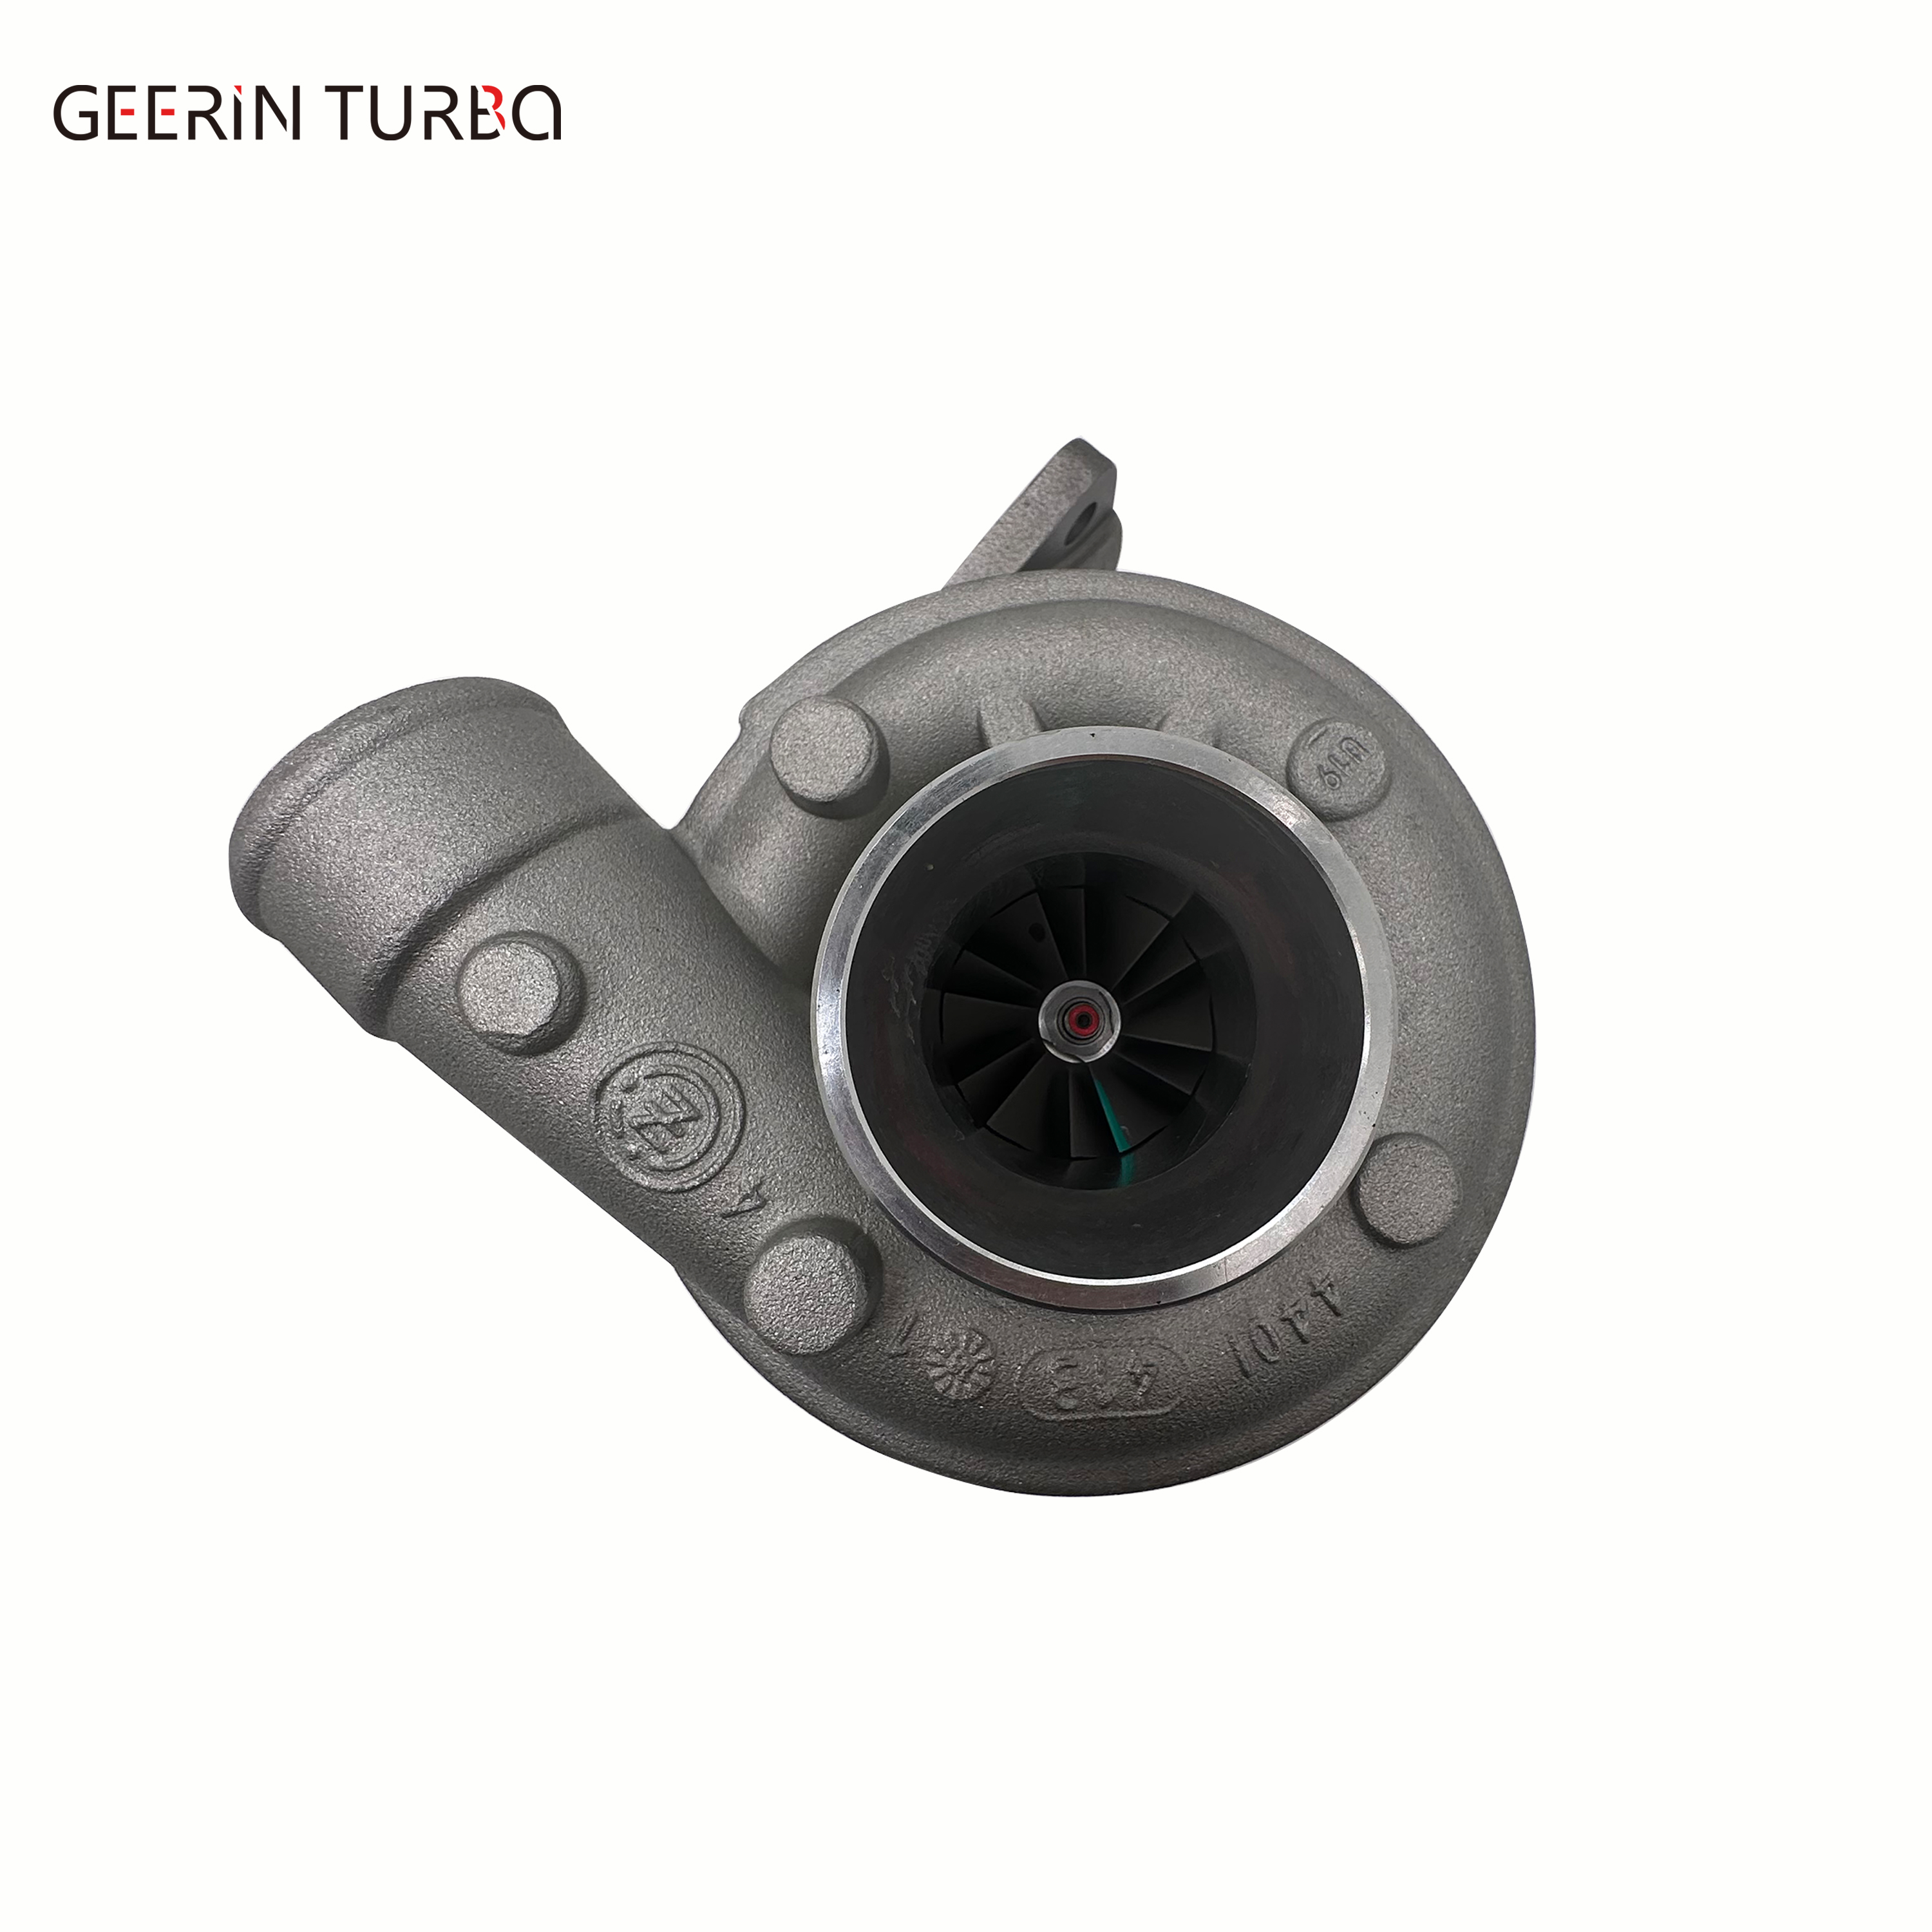 C14 c14-127-01 Turbocharger Kit with D245 Engine Factory